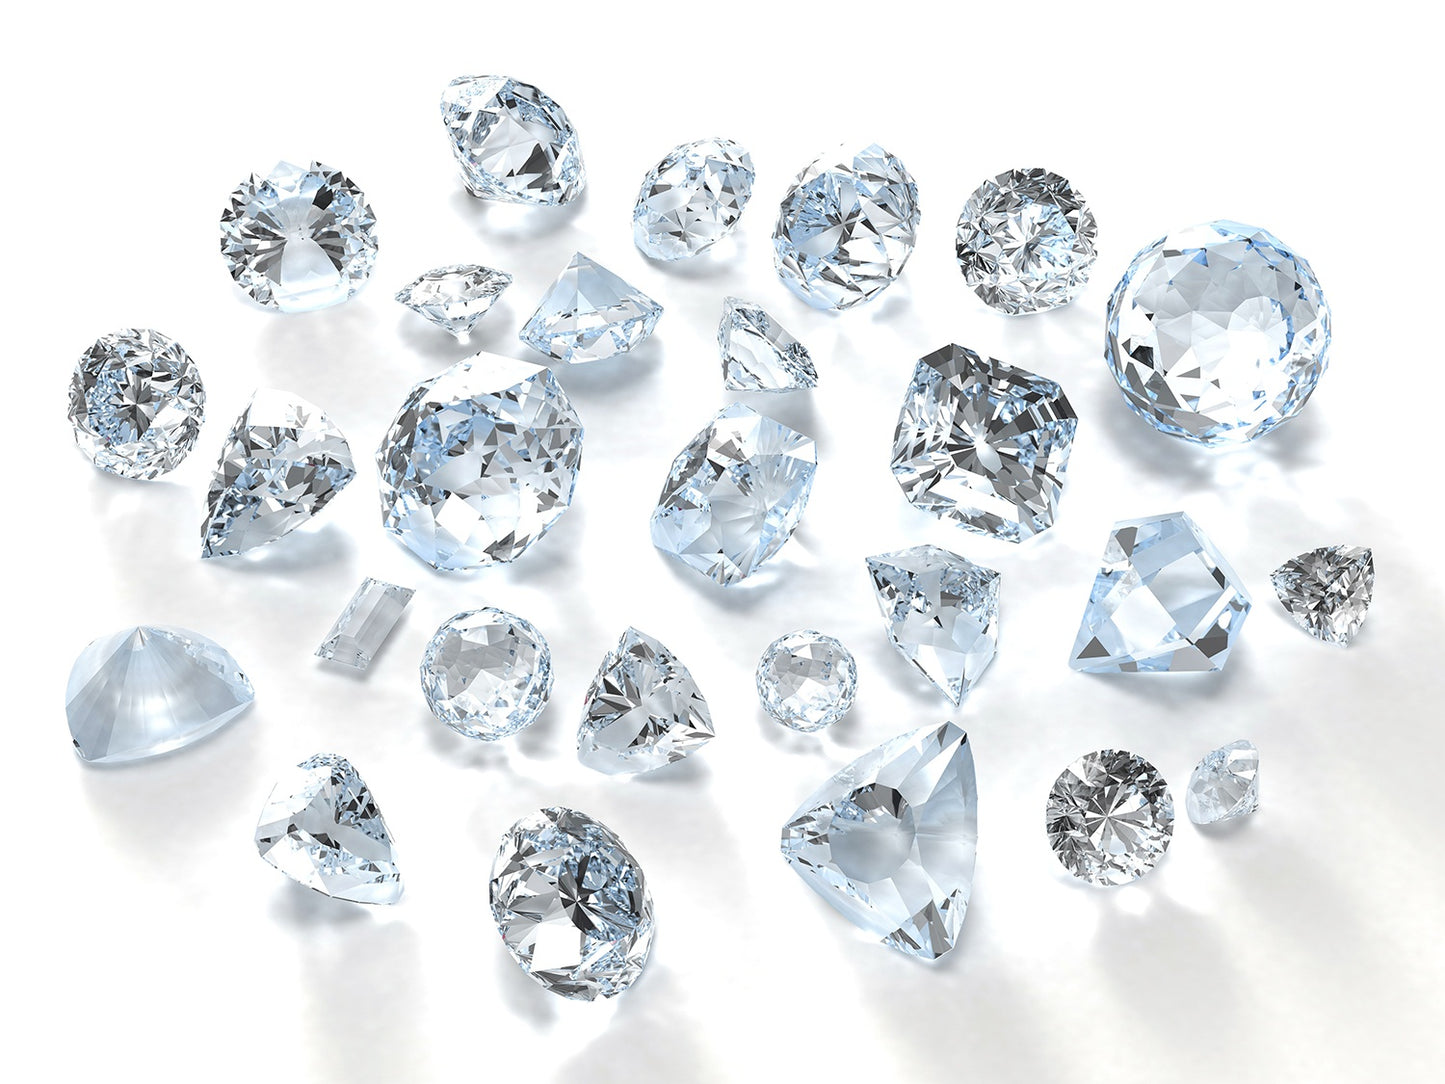 Loose diamonds in front of white background